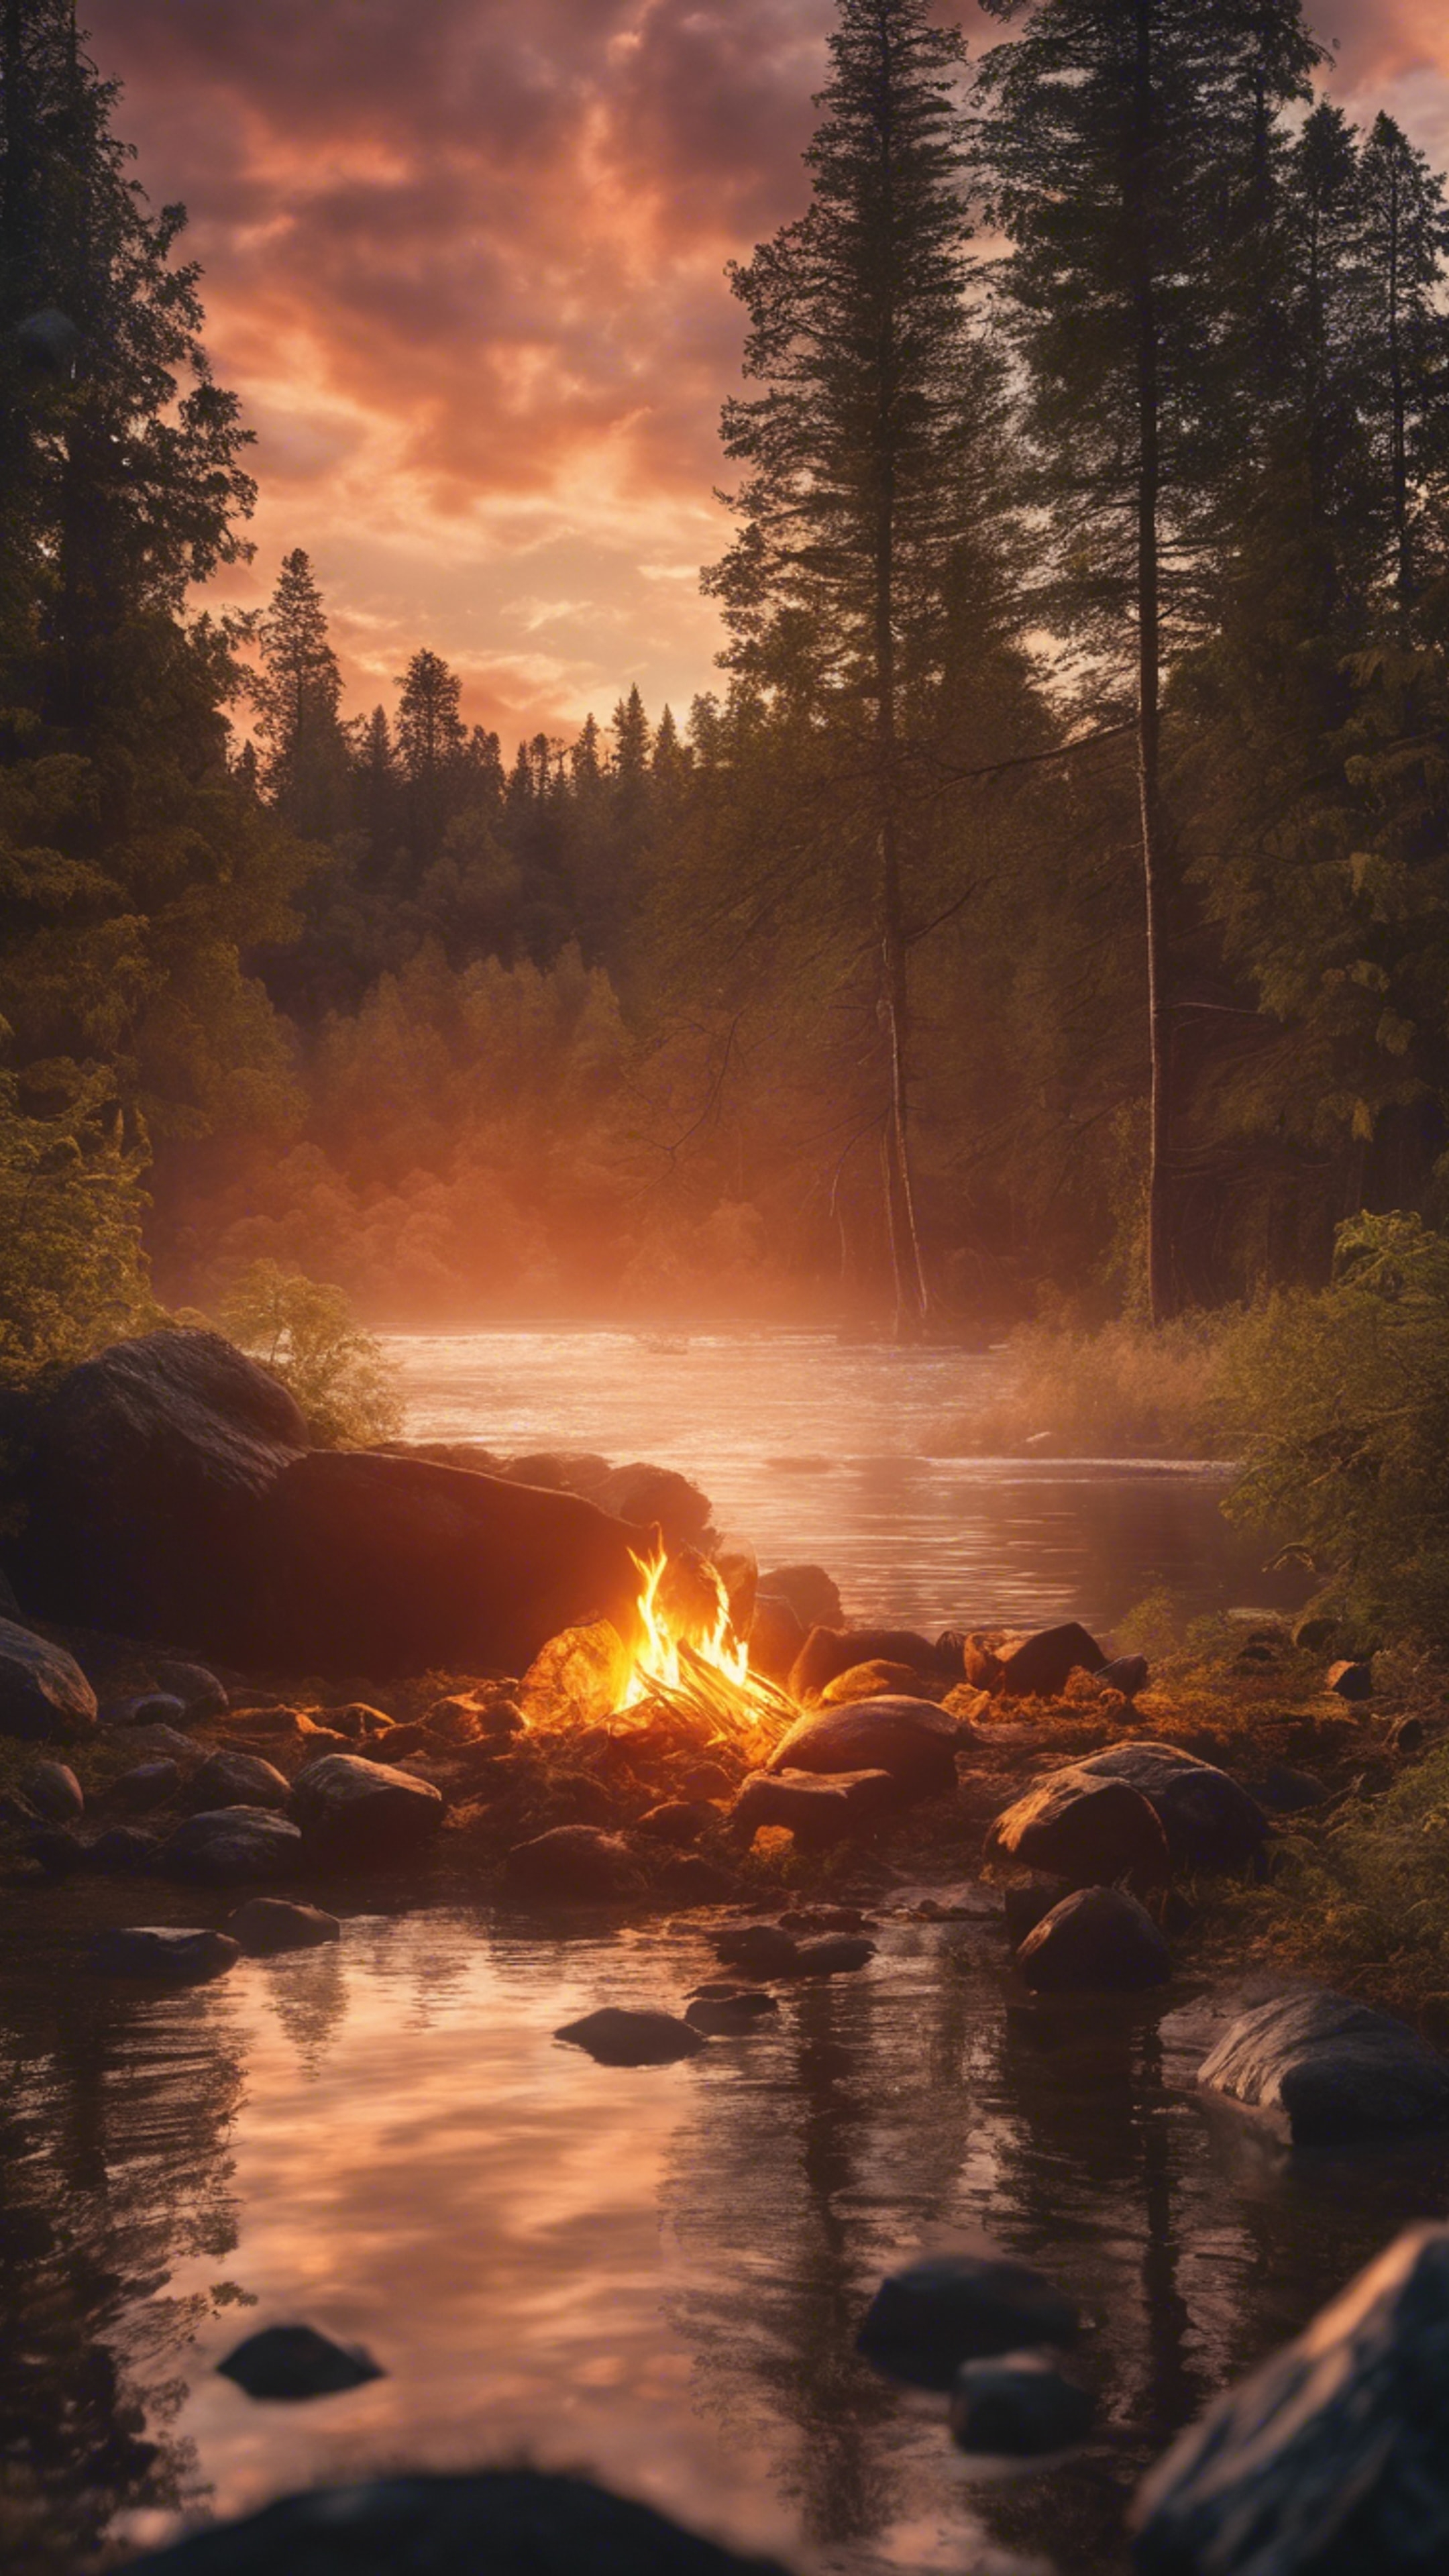 A lone campfire under the grandeur of a mesmerizing sunset in the dense forest.壁紙[98099e6a523840a4b1bf]